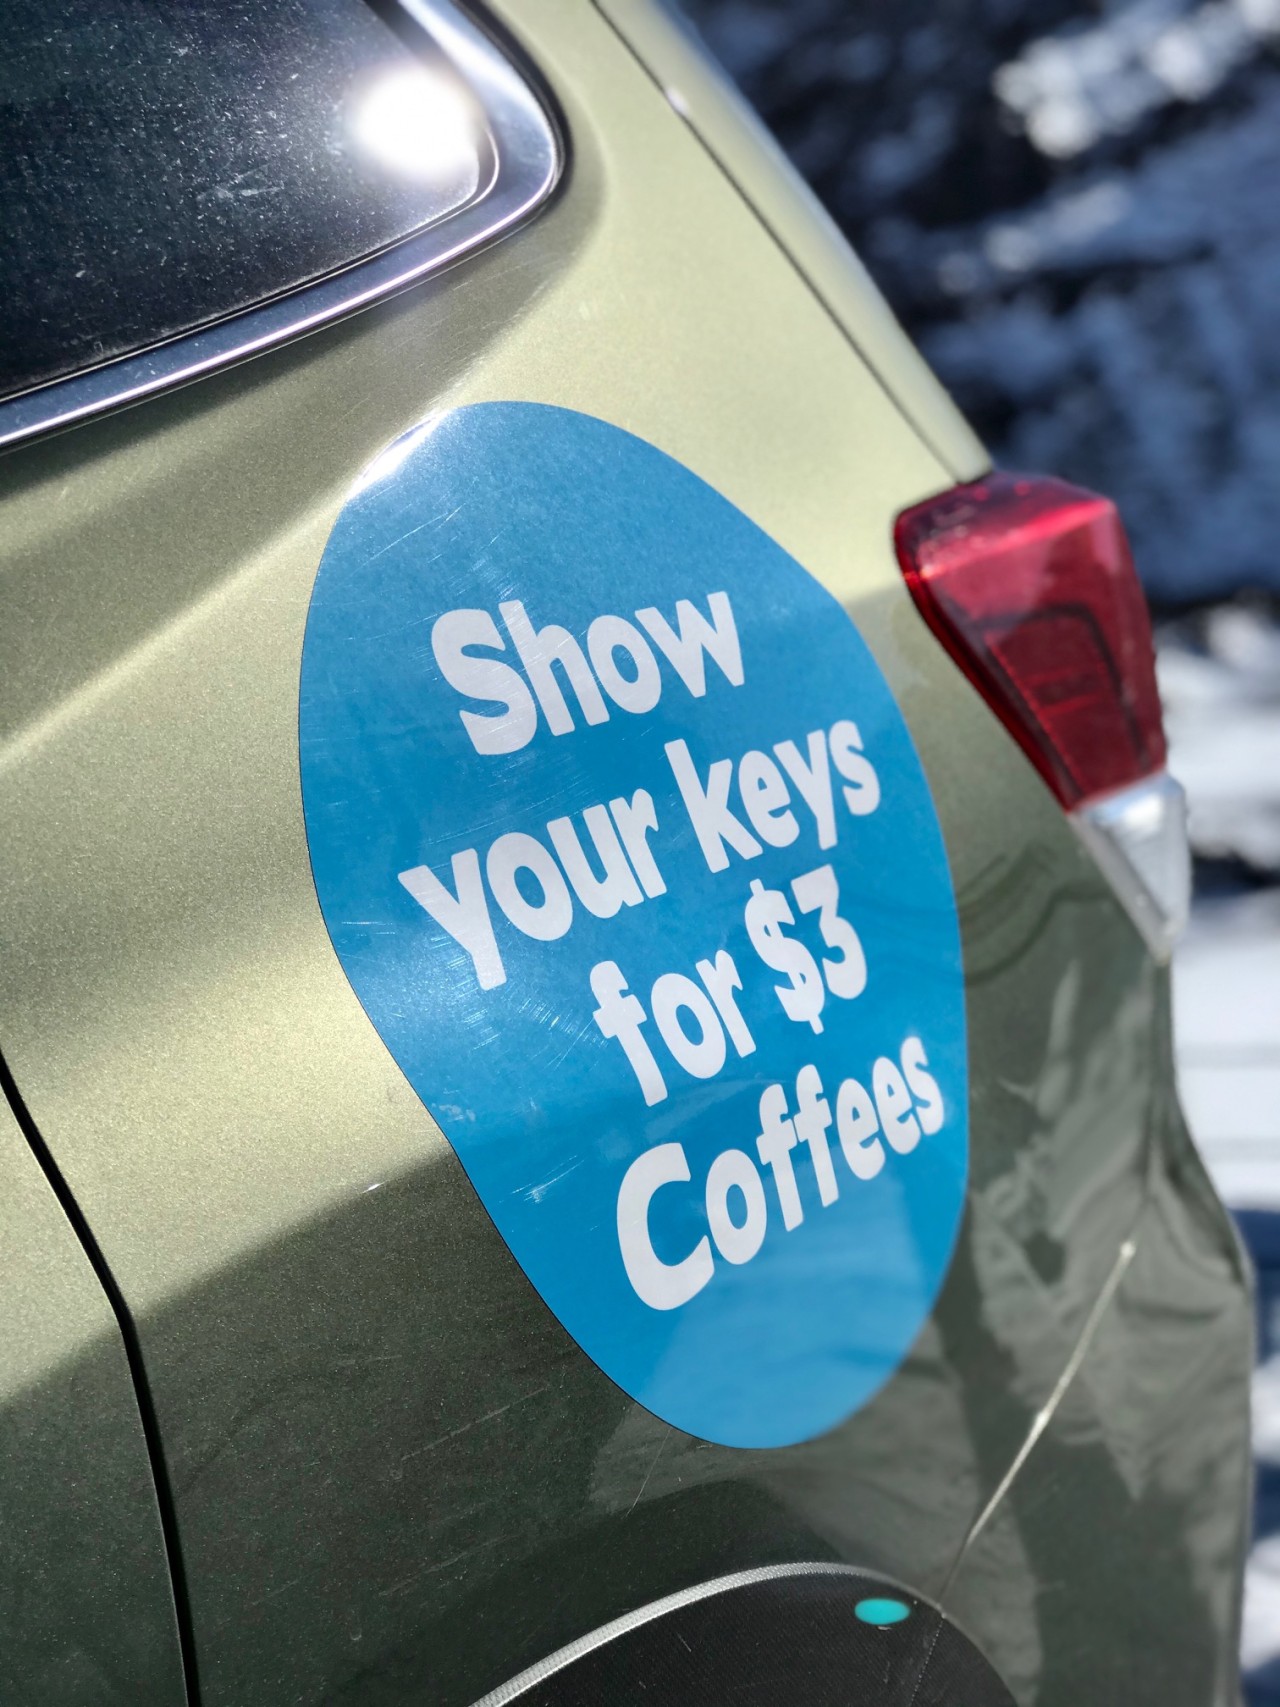 Subaru owners can get their discounted caffeine fix by showing their Subaru keys at Mt Ruapehu cafes to receive $3 coffees in the peak season between August 1st and September 30th, 2021.